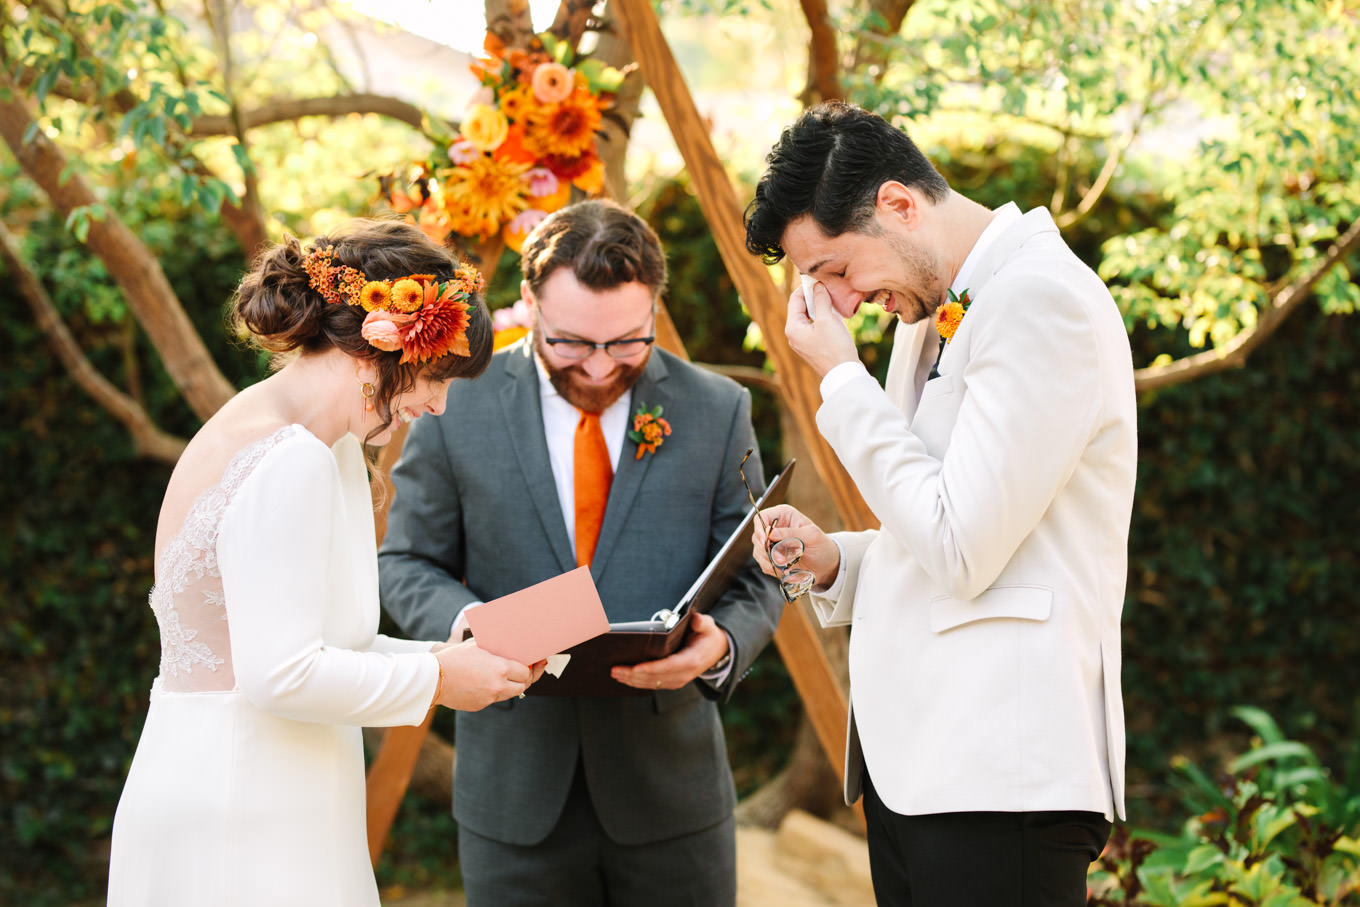 Bride and groom in prayer | Vibrant backyard micro wedding featured on Green Wedding Shoes | Colorful LA wedding photography | #losangeleswedding #backyardwedding #microwedding #laweddingphotographer Source: Mary Costa Photography | Los Angeles